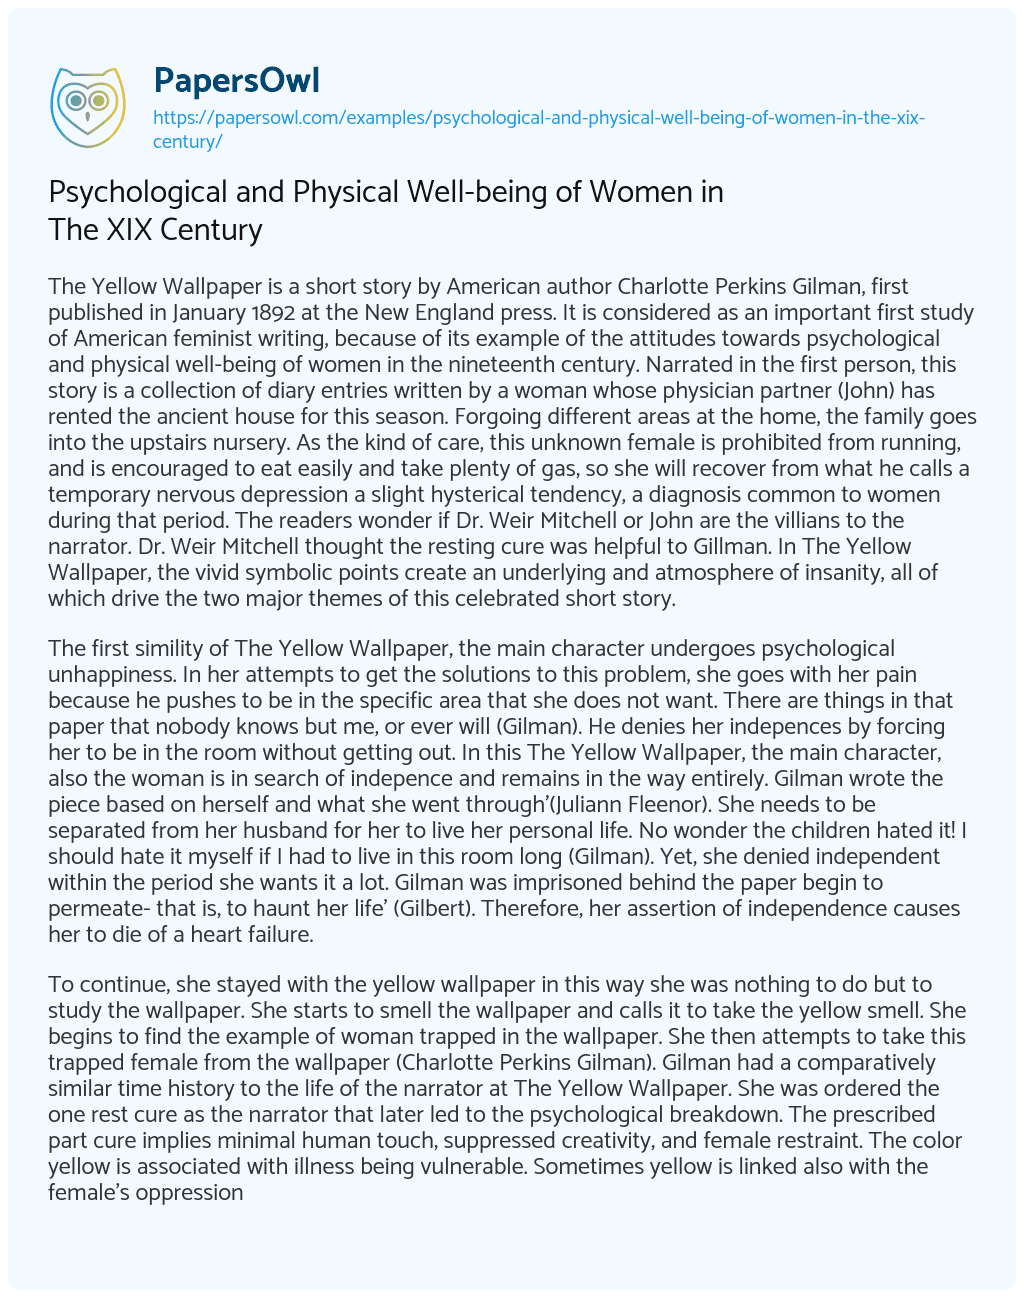 Psychological and Physical Well-being of Women in the XIX Century essay